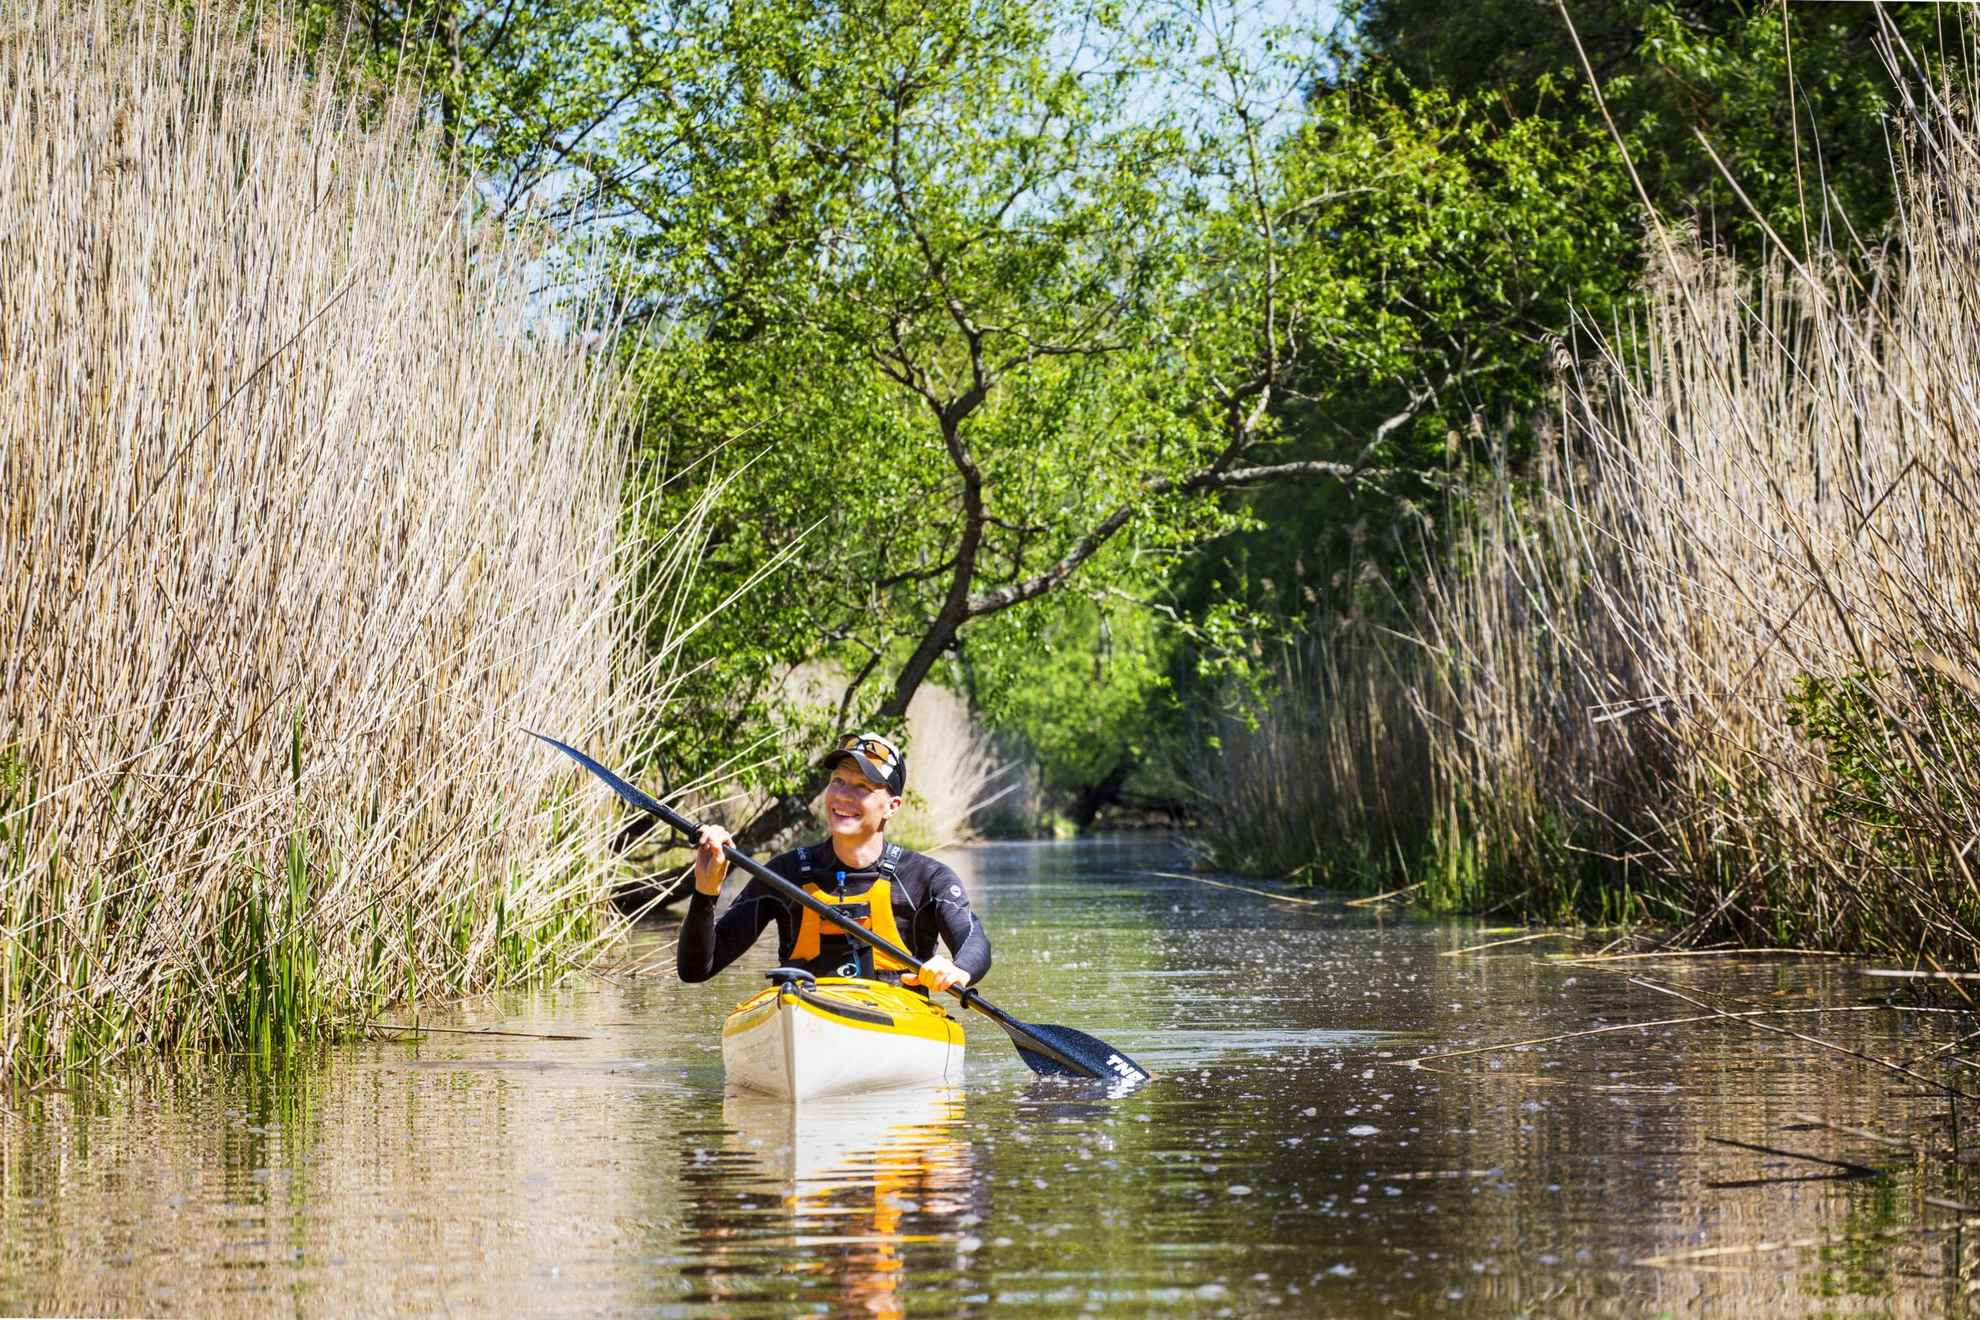 A man is kayaking in a river. There is reed and trees on each side of the water.